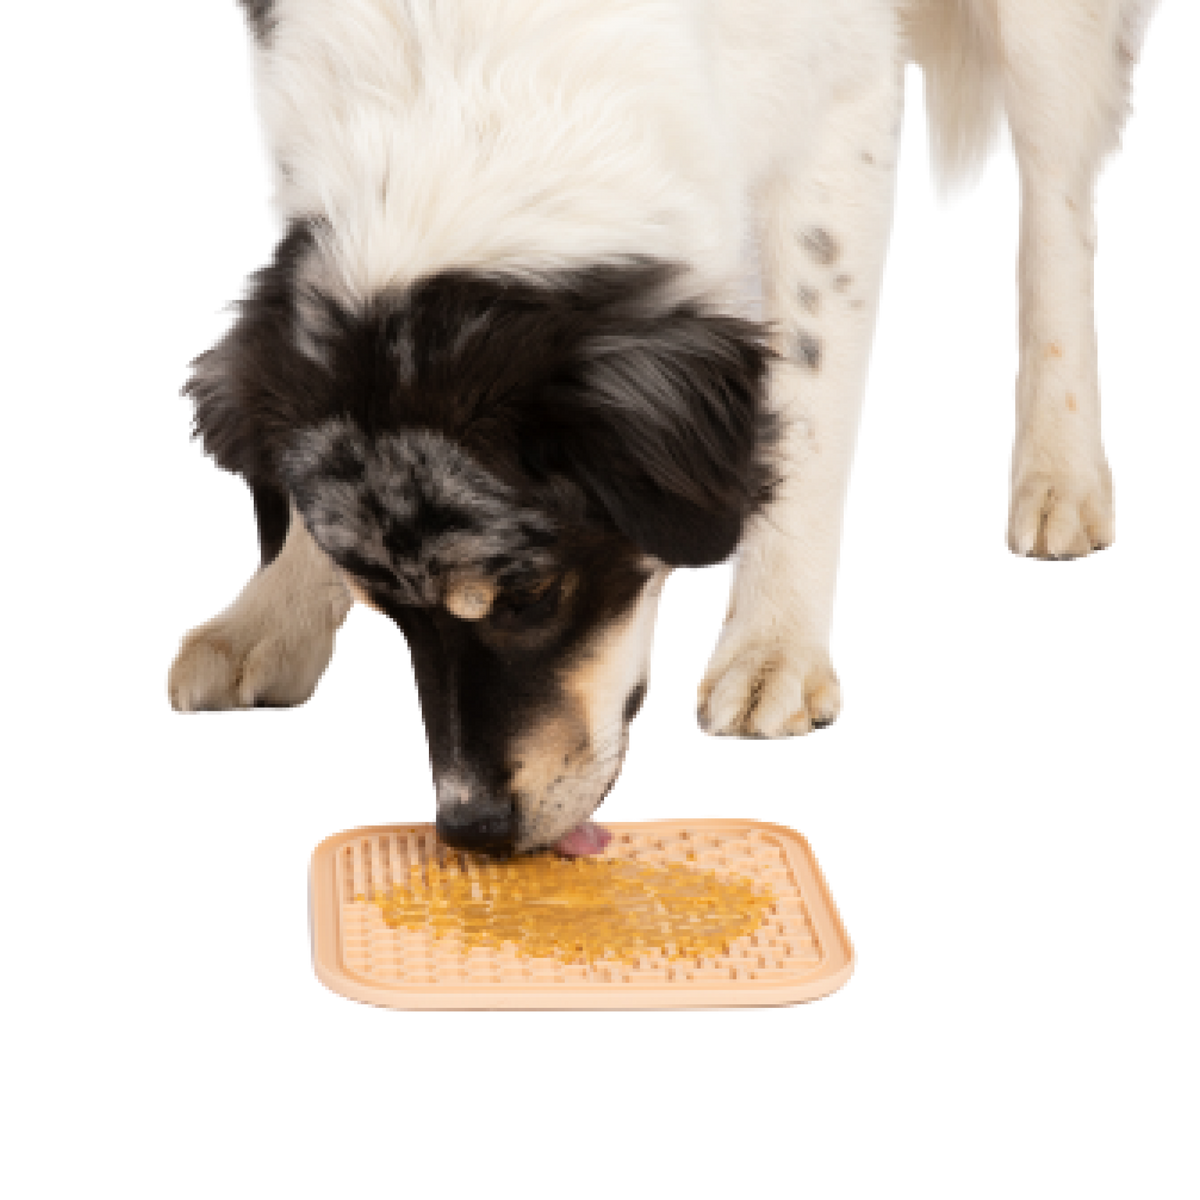 Buy Creamy Peanut Butter with Free Lick Mat | Dog for Dog